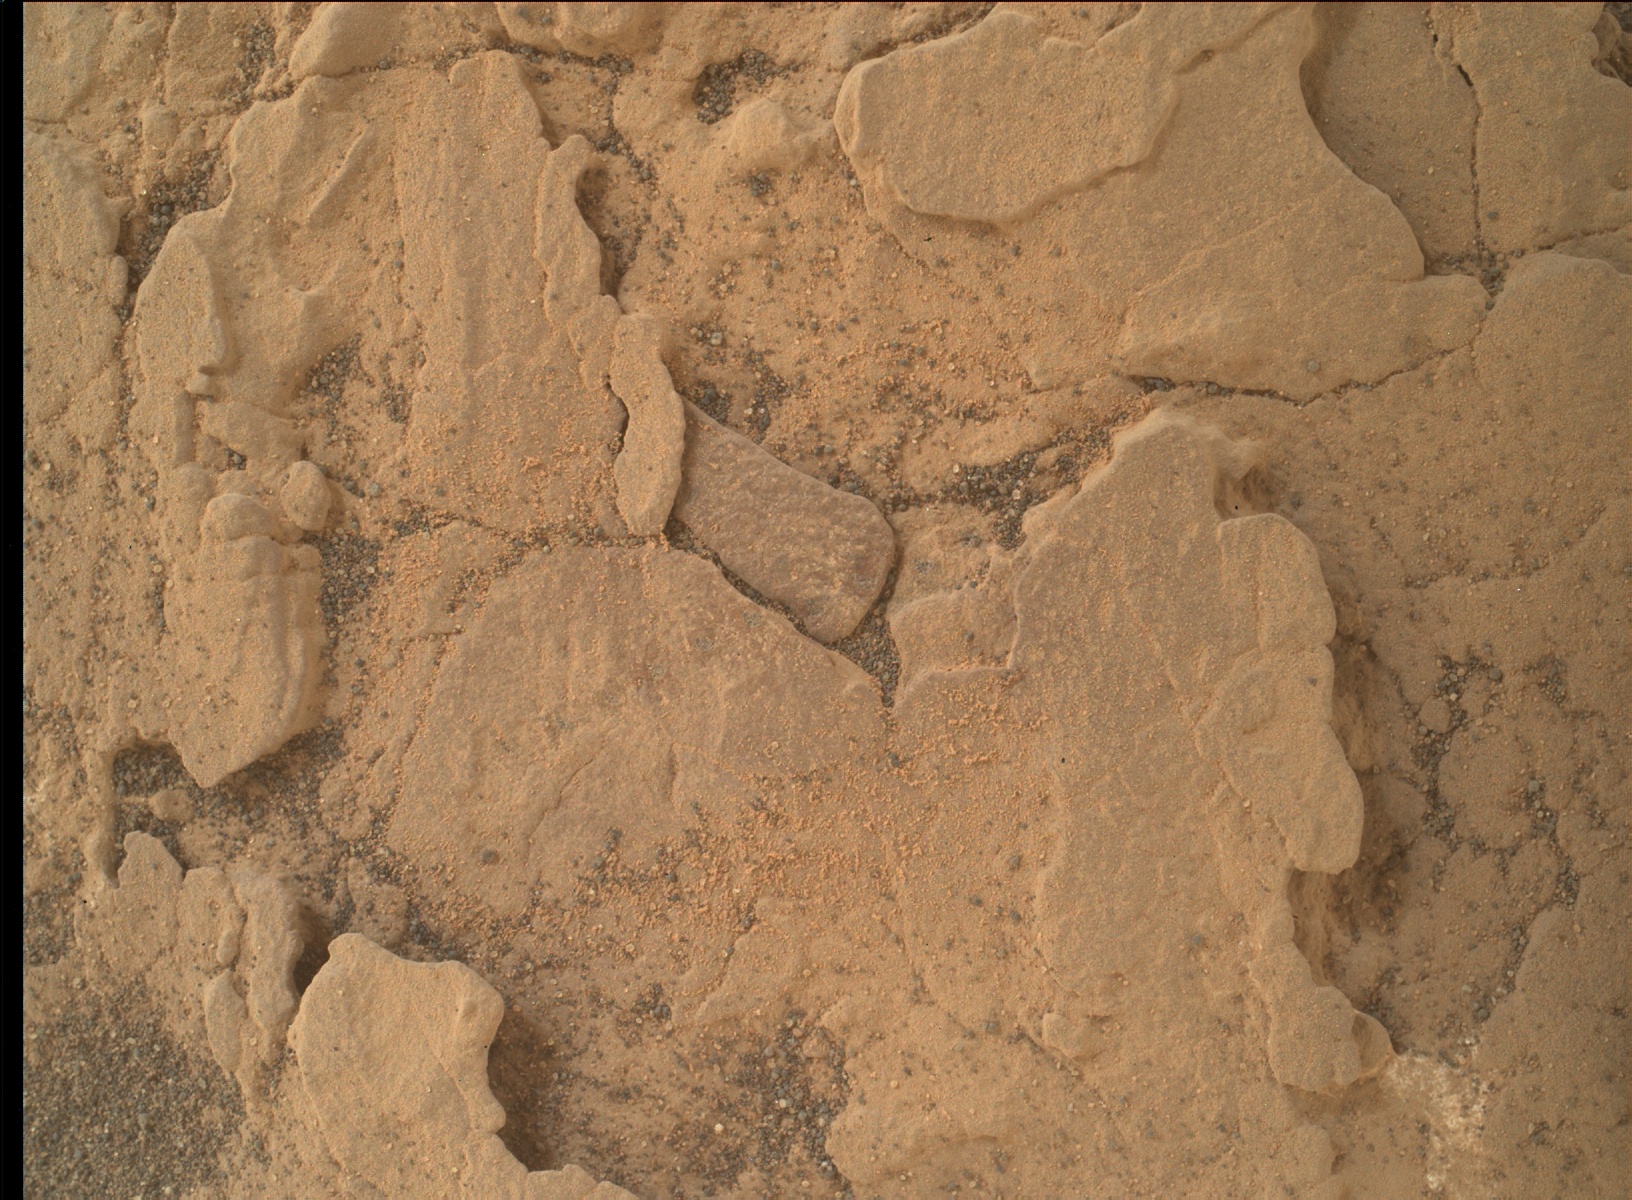 Nasa's Mars rover Curiosity acquired this image using its Mars Hand Lens Imager (MAHLI) on Sol 2461